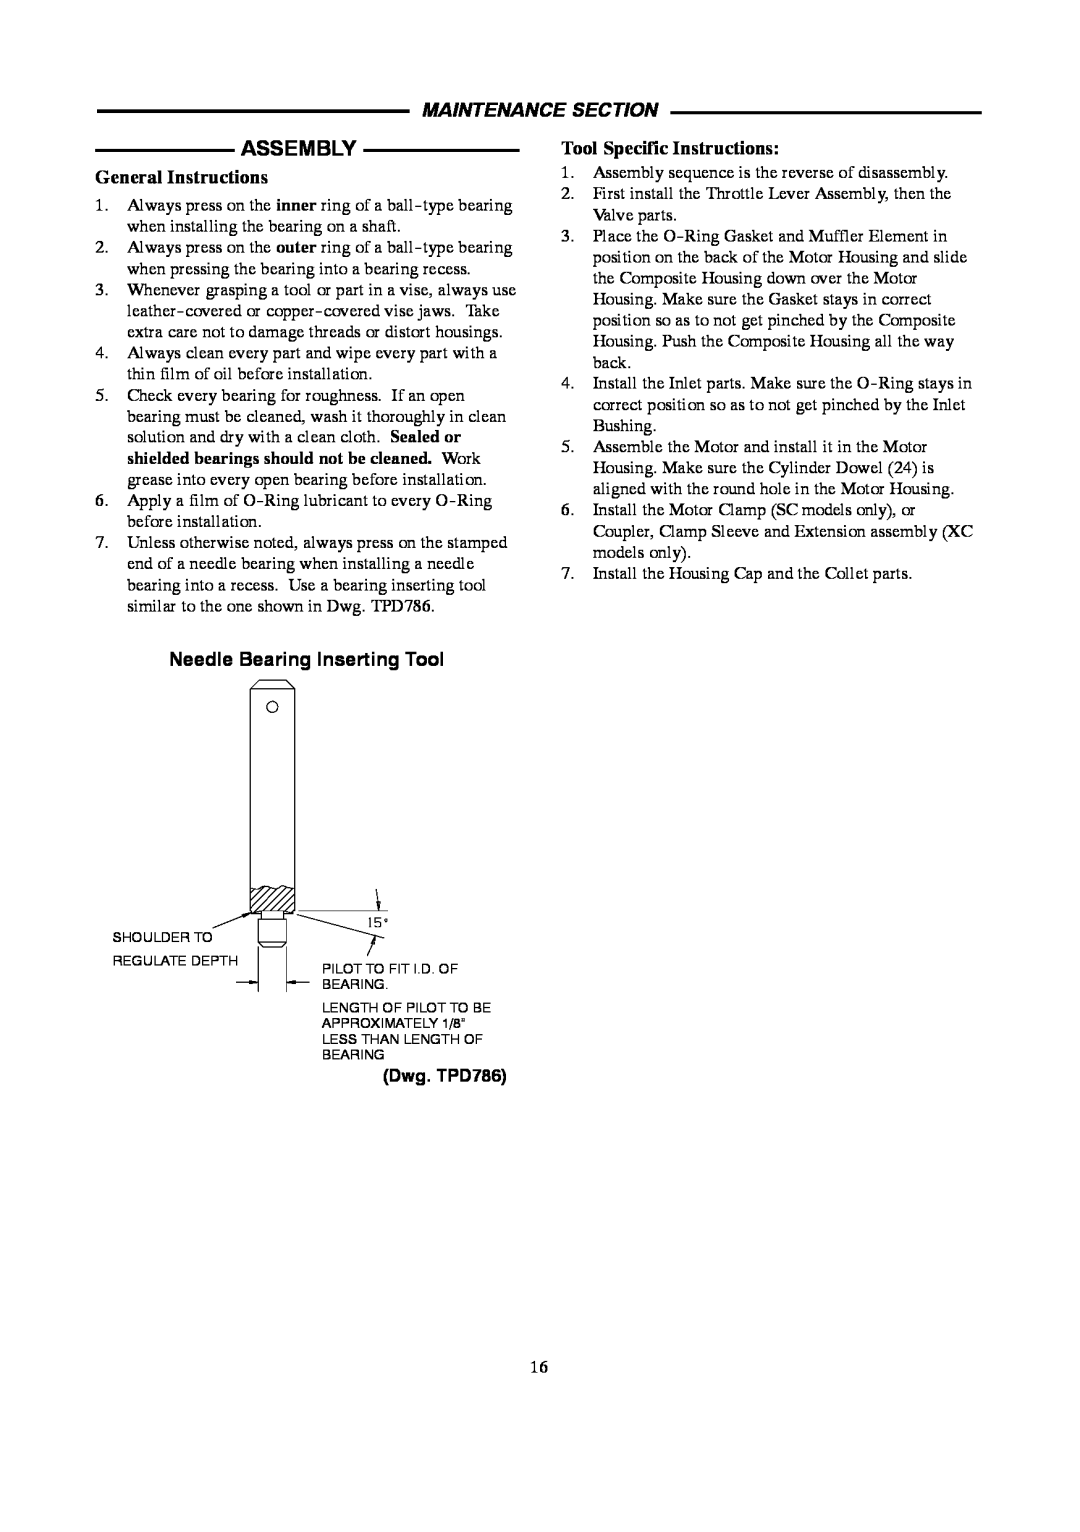 Ingersoll-Rand 4578217 Assembly, General Instructions, Needle Bearing Inserting Tool, Dwg. TPD786, Maintenance Section 